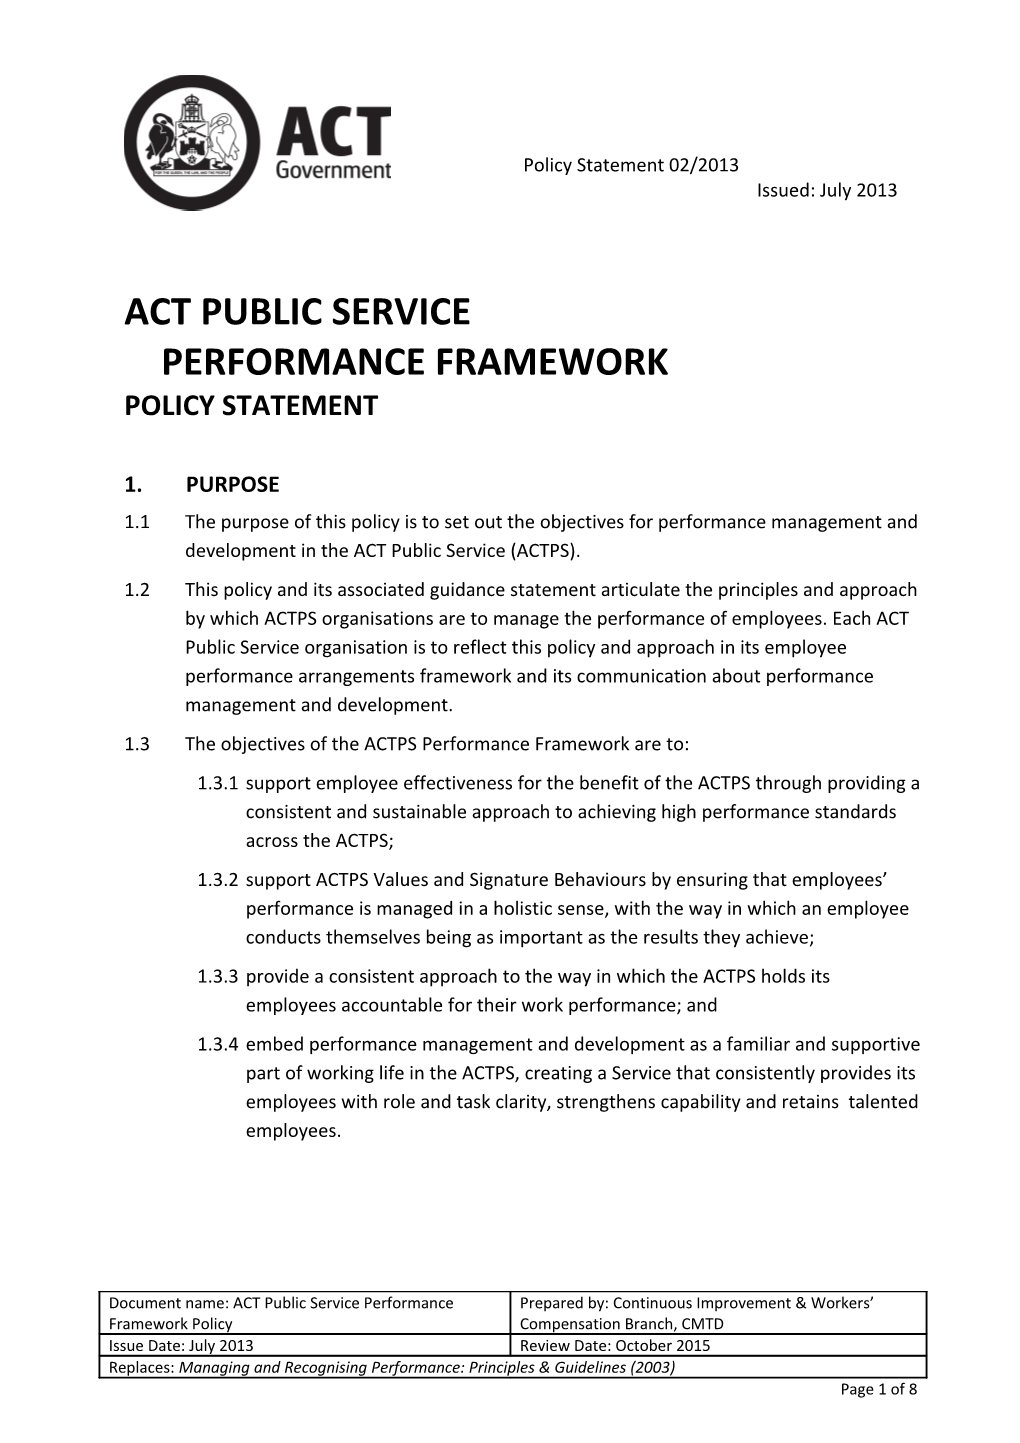 Act Public Service Performance Framework Policy Statement